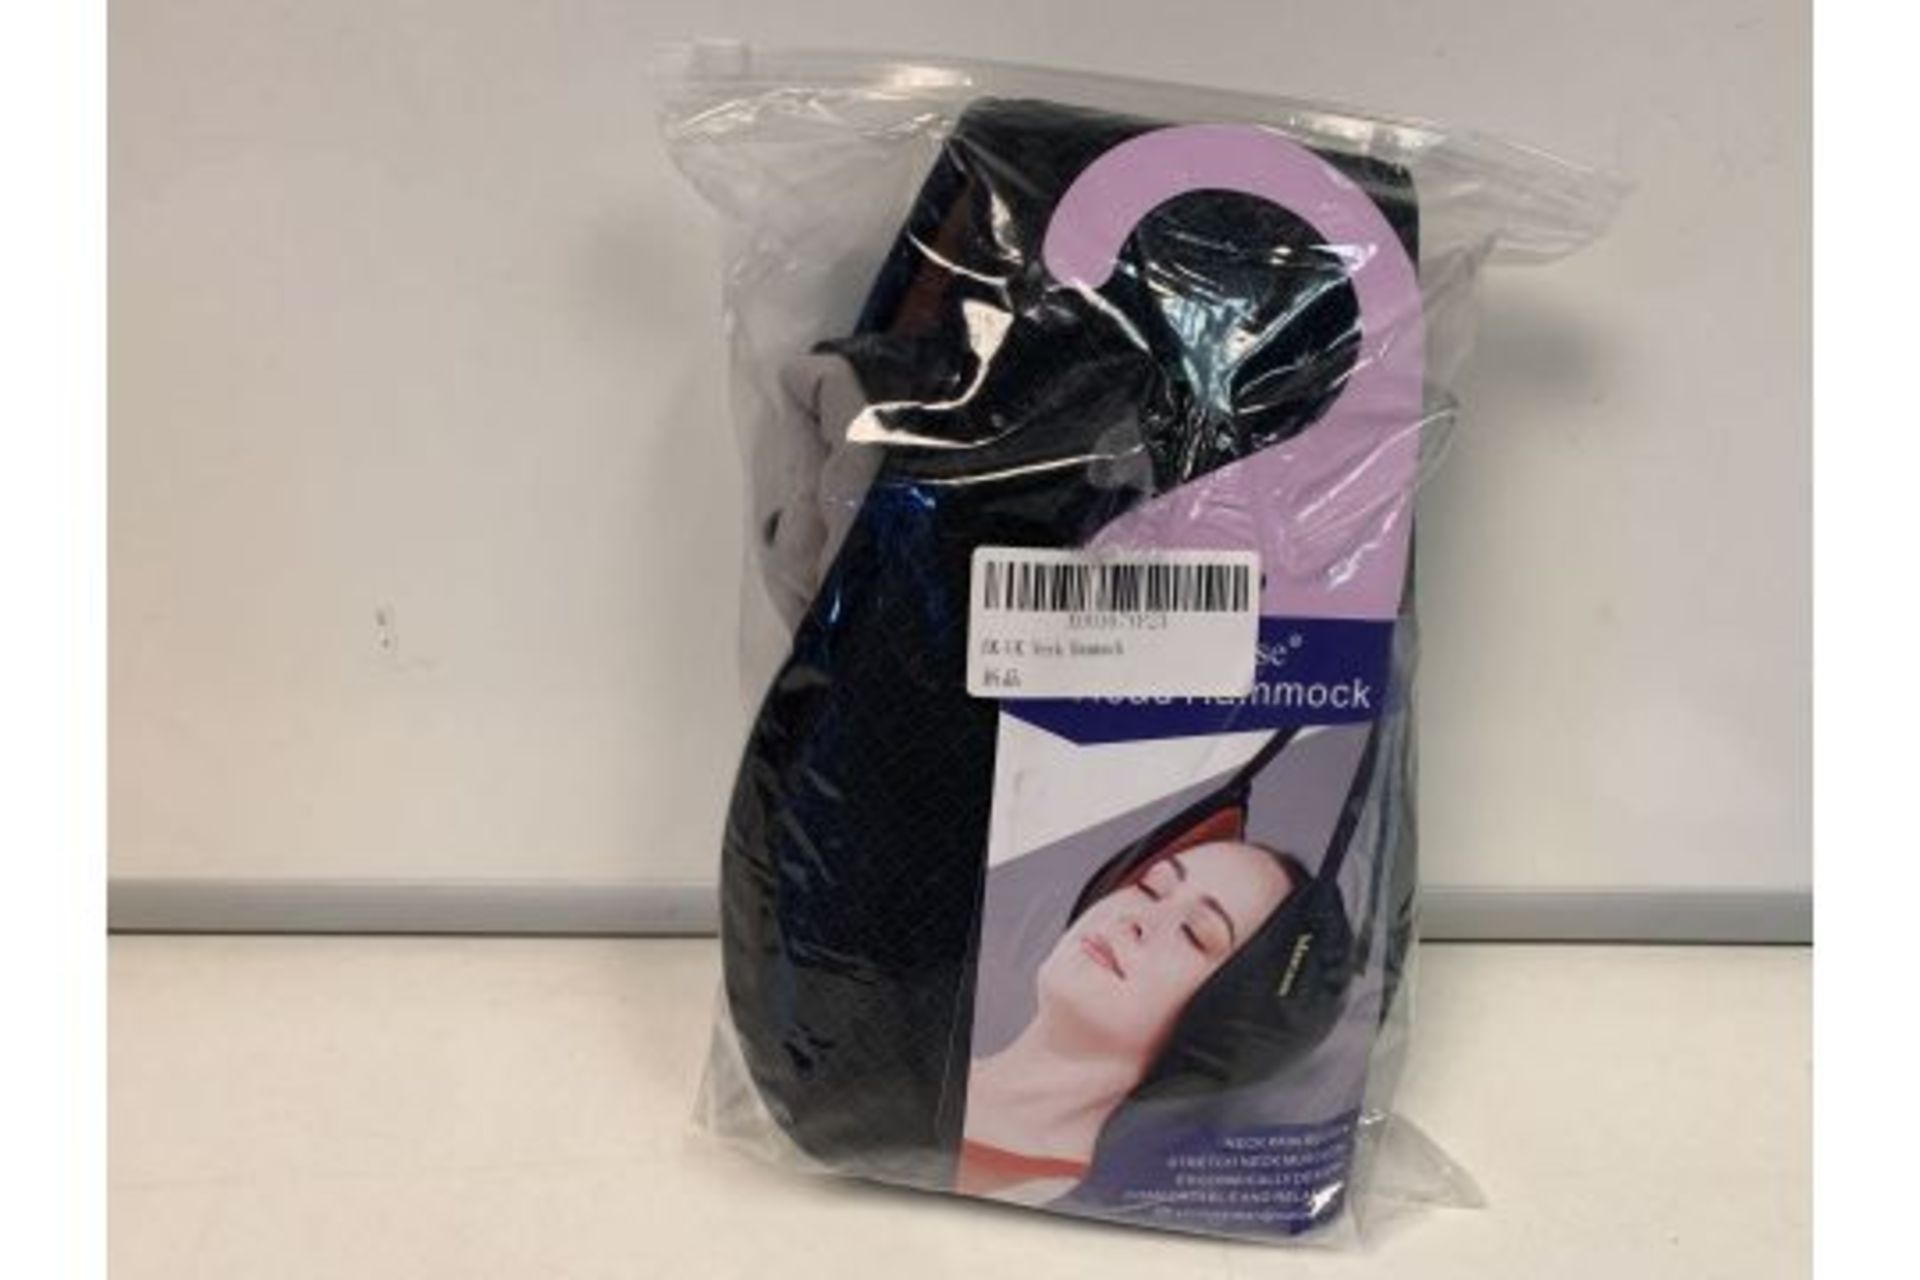 30 X BRAND NEW MERCASE HEAD HAMMOCK POSTURE SUPPORTS SIZE LARGE RRP £18 EACH S1R